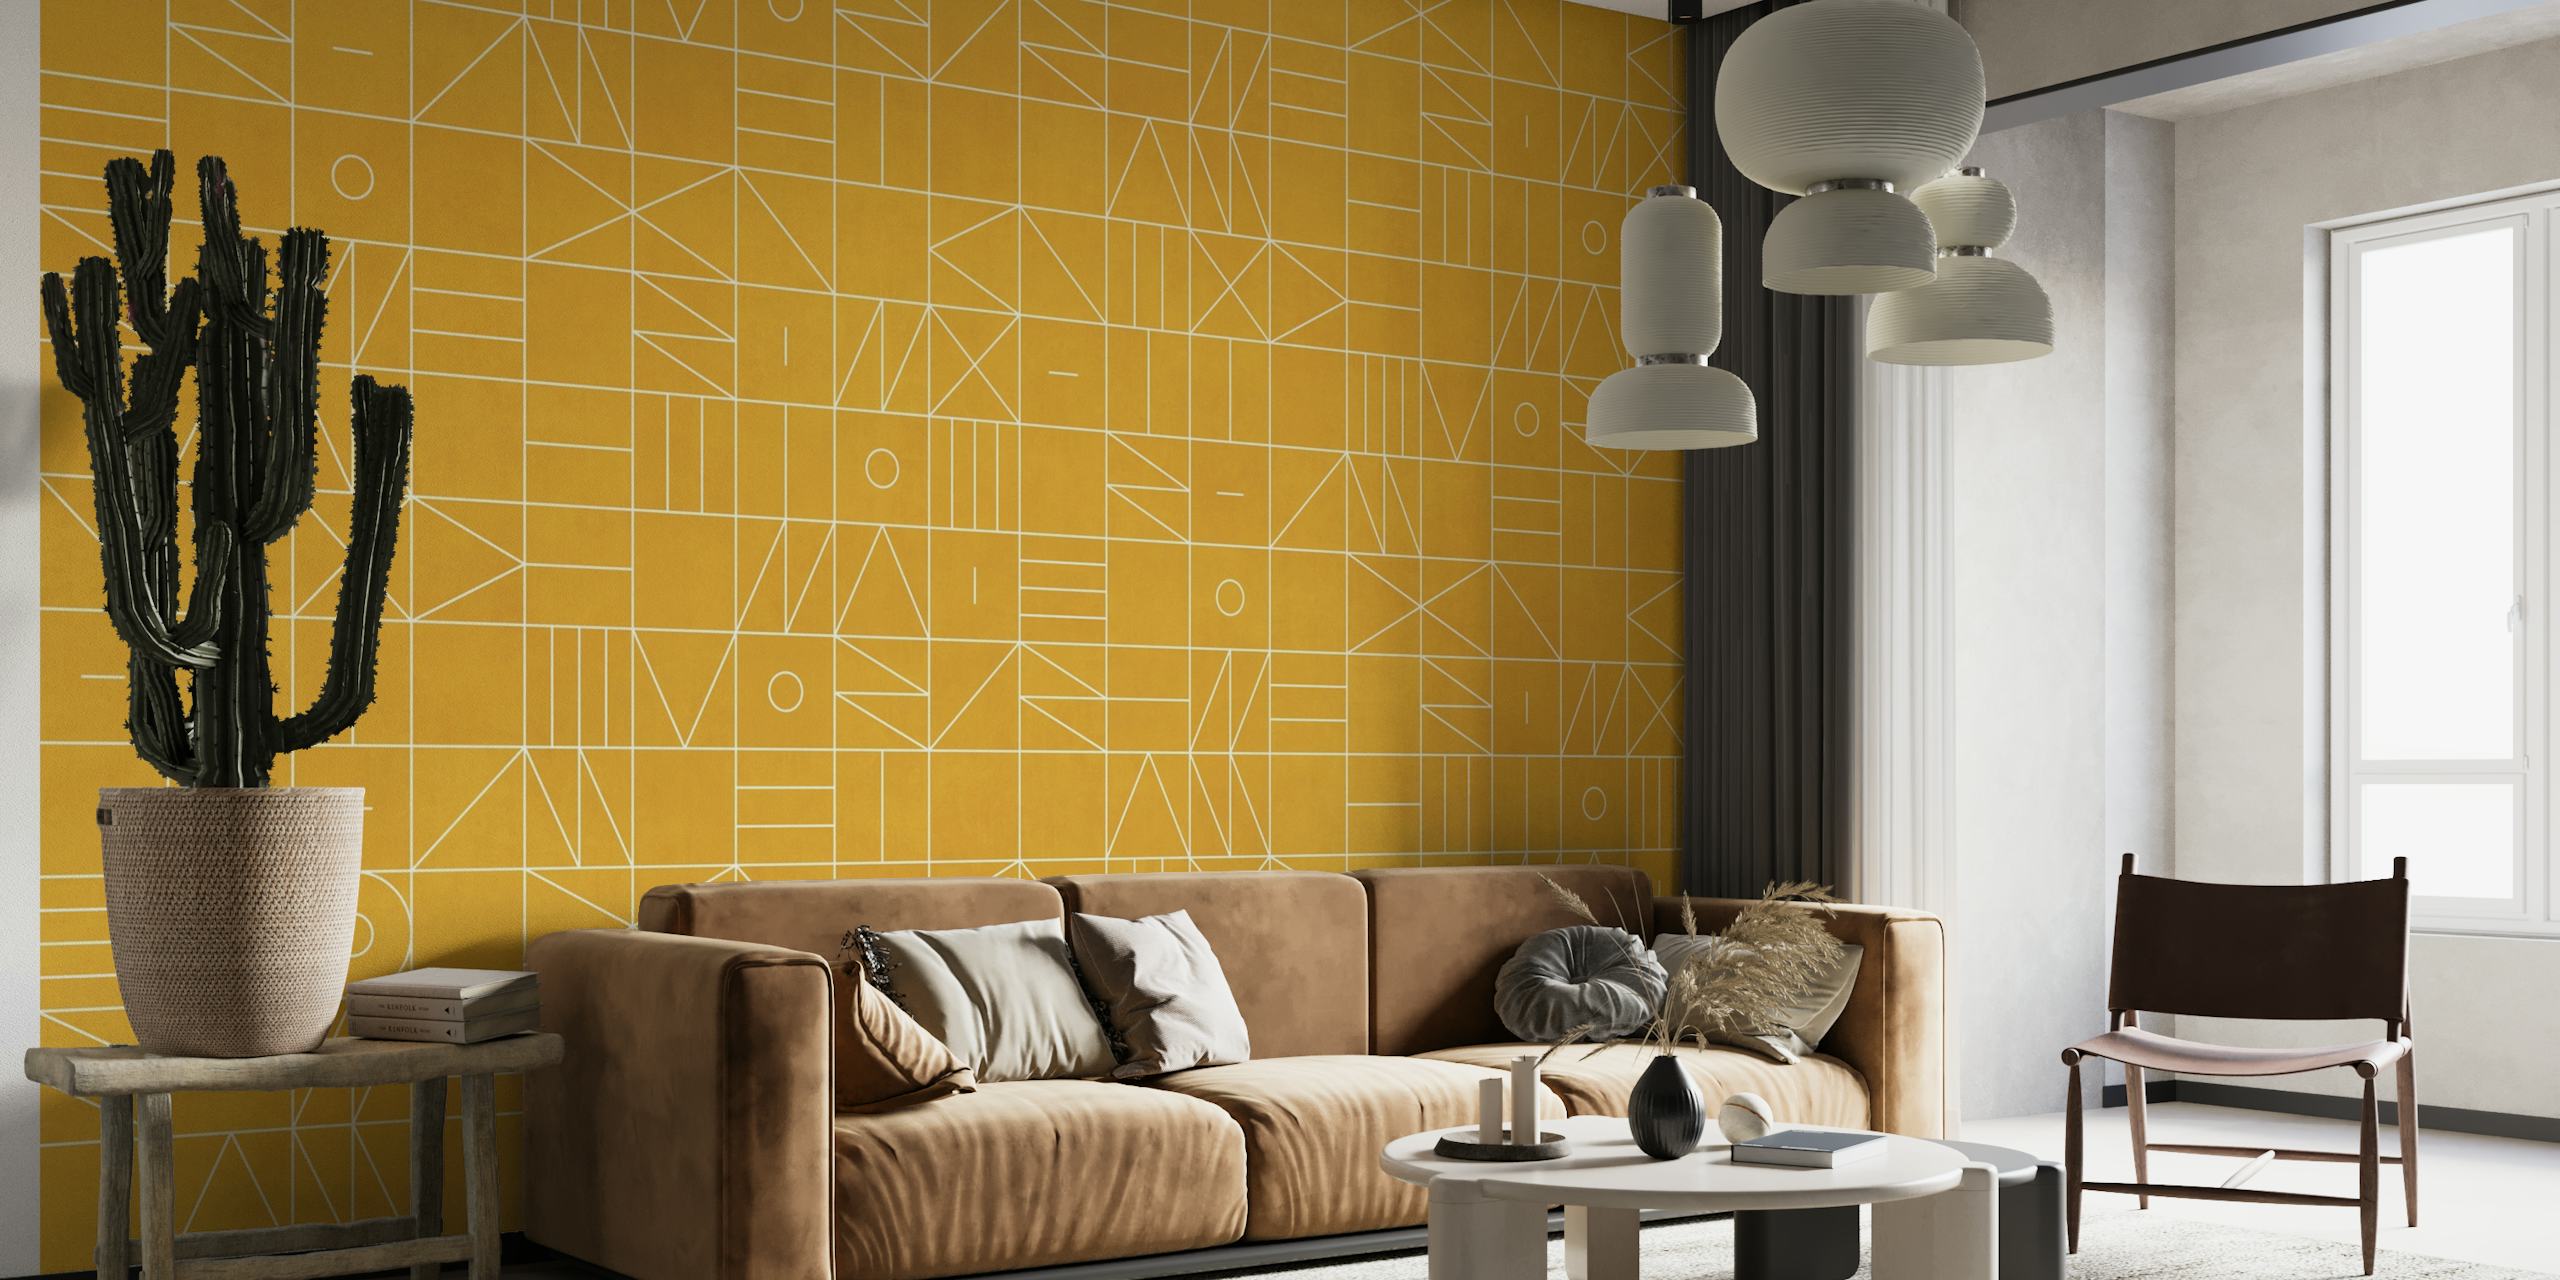 Mustard yellow geometric pattern wall mural with white linear designs